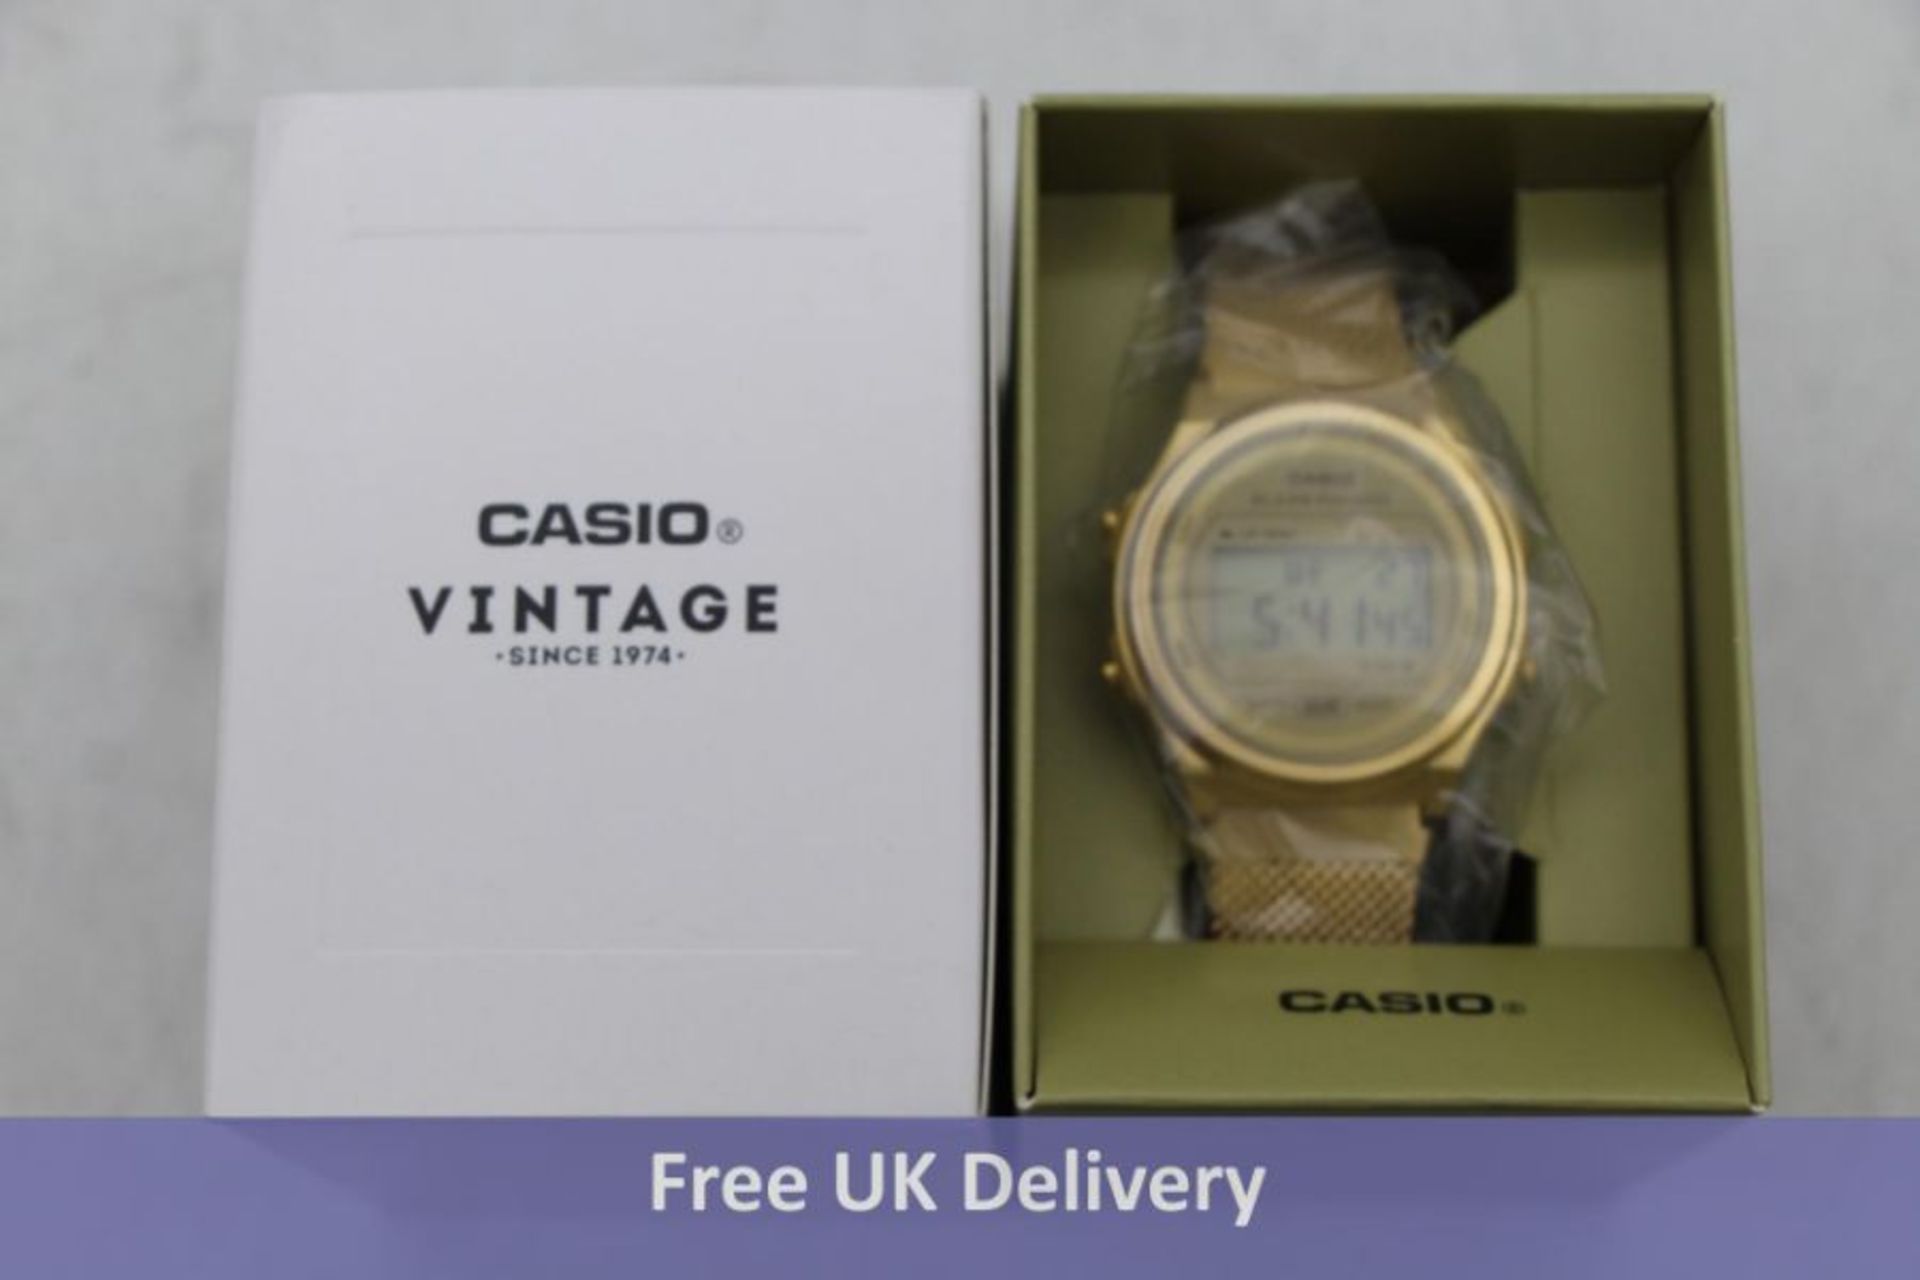 Five Casio Vintage Series Watches, Colour Gold, A171WEMG-9AEF - Image 2 of 5